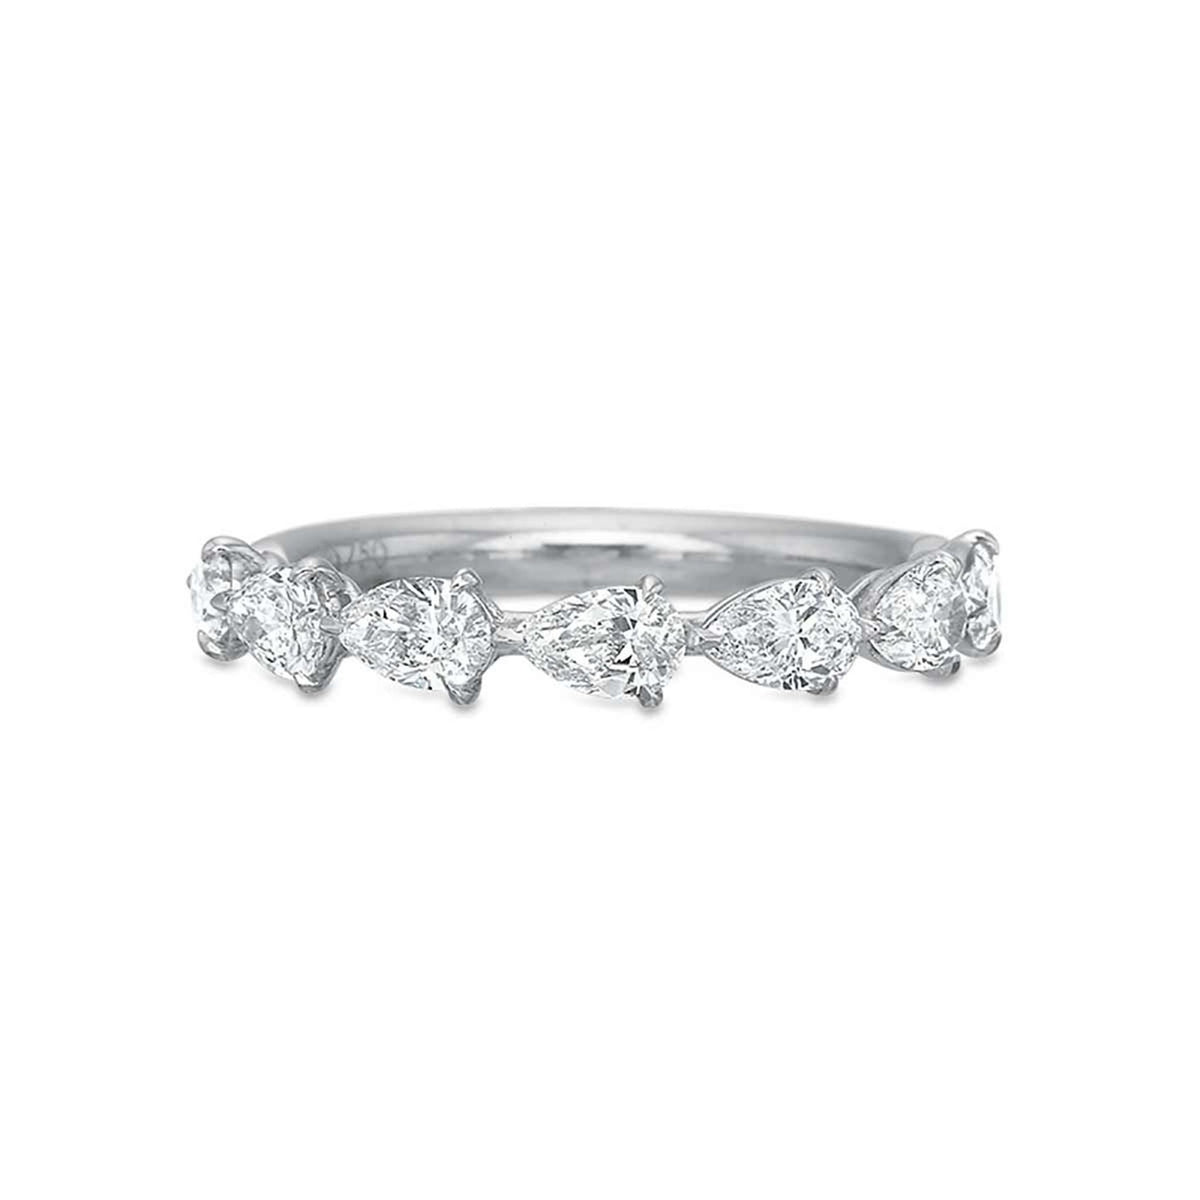 18Kt White Gold Stackable Wedding Ring With 0.49cttw Natural Diamonds